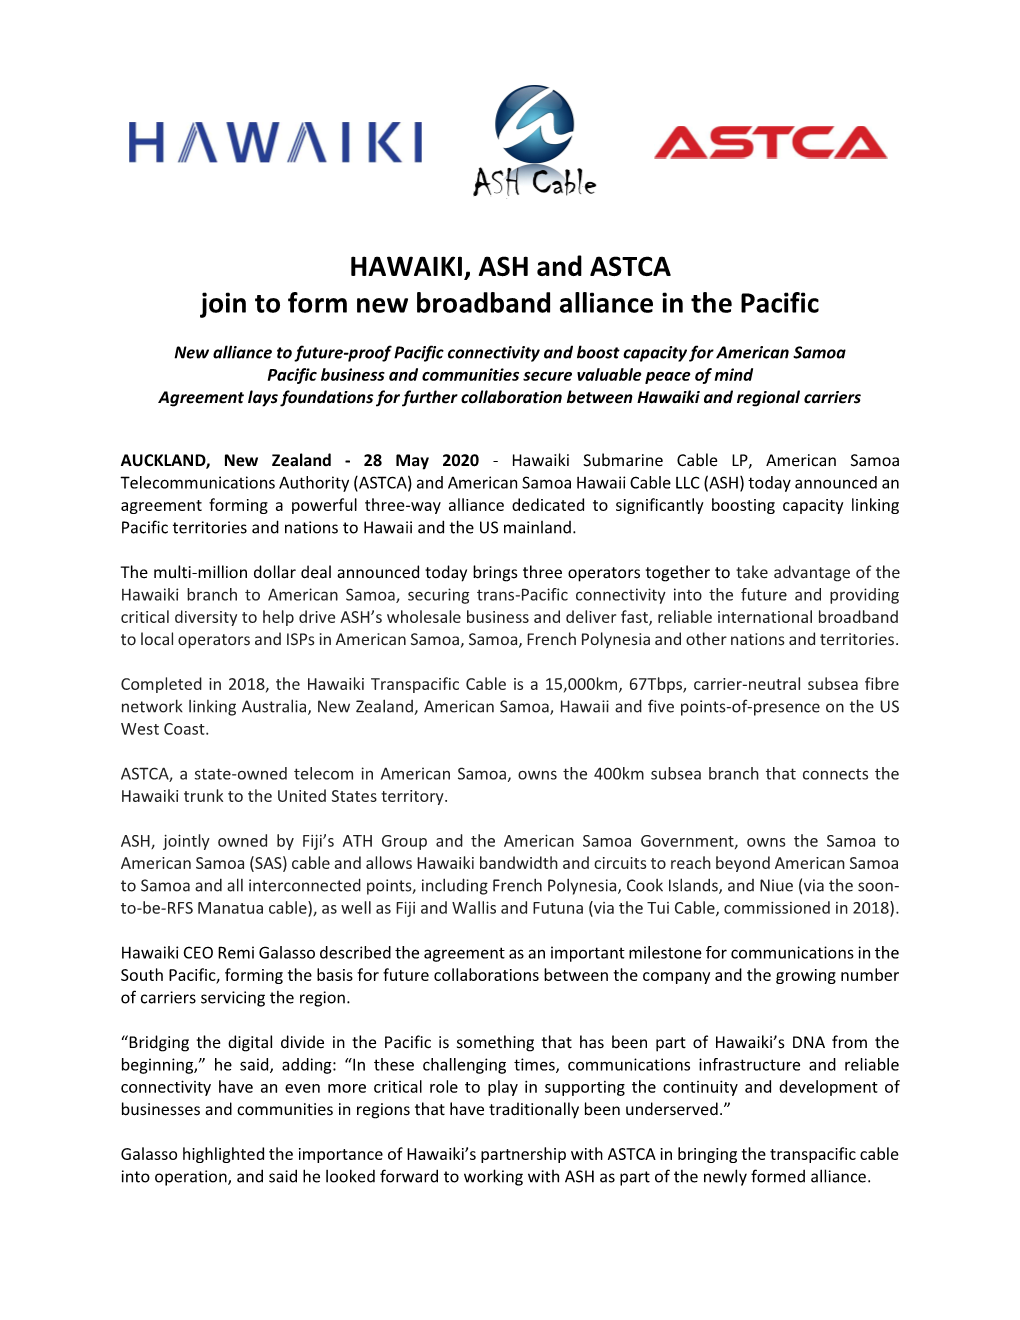 HAWAIKI, ASH and ASTCA Join to Form New Broadband Alliance in the Pacific